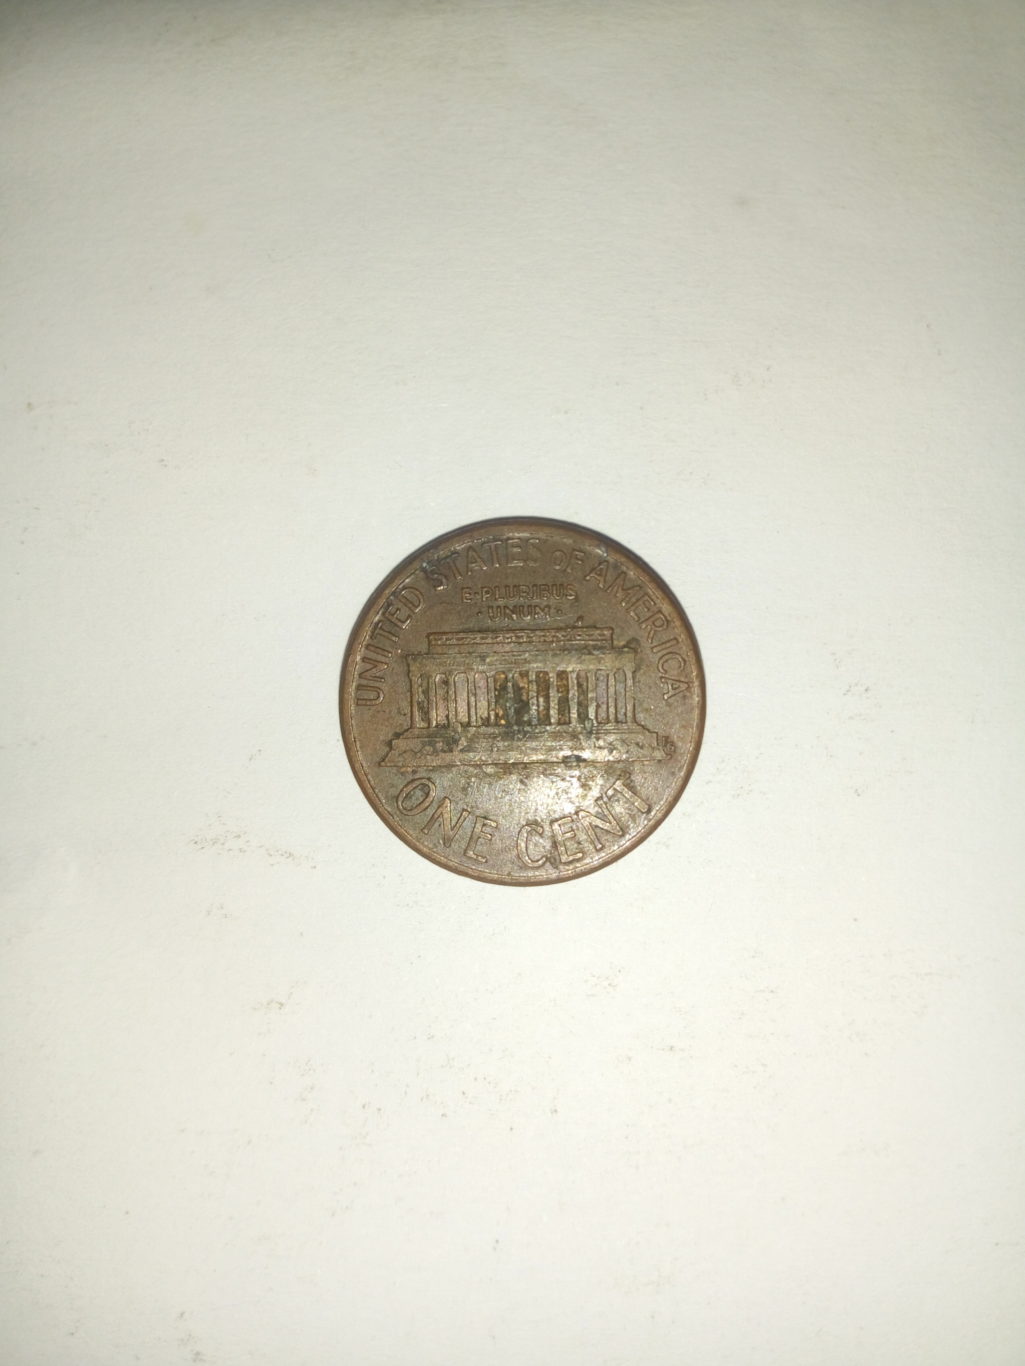 1990_ united states of America 1 cent